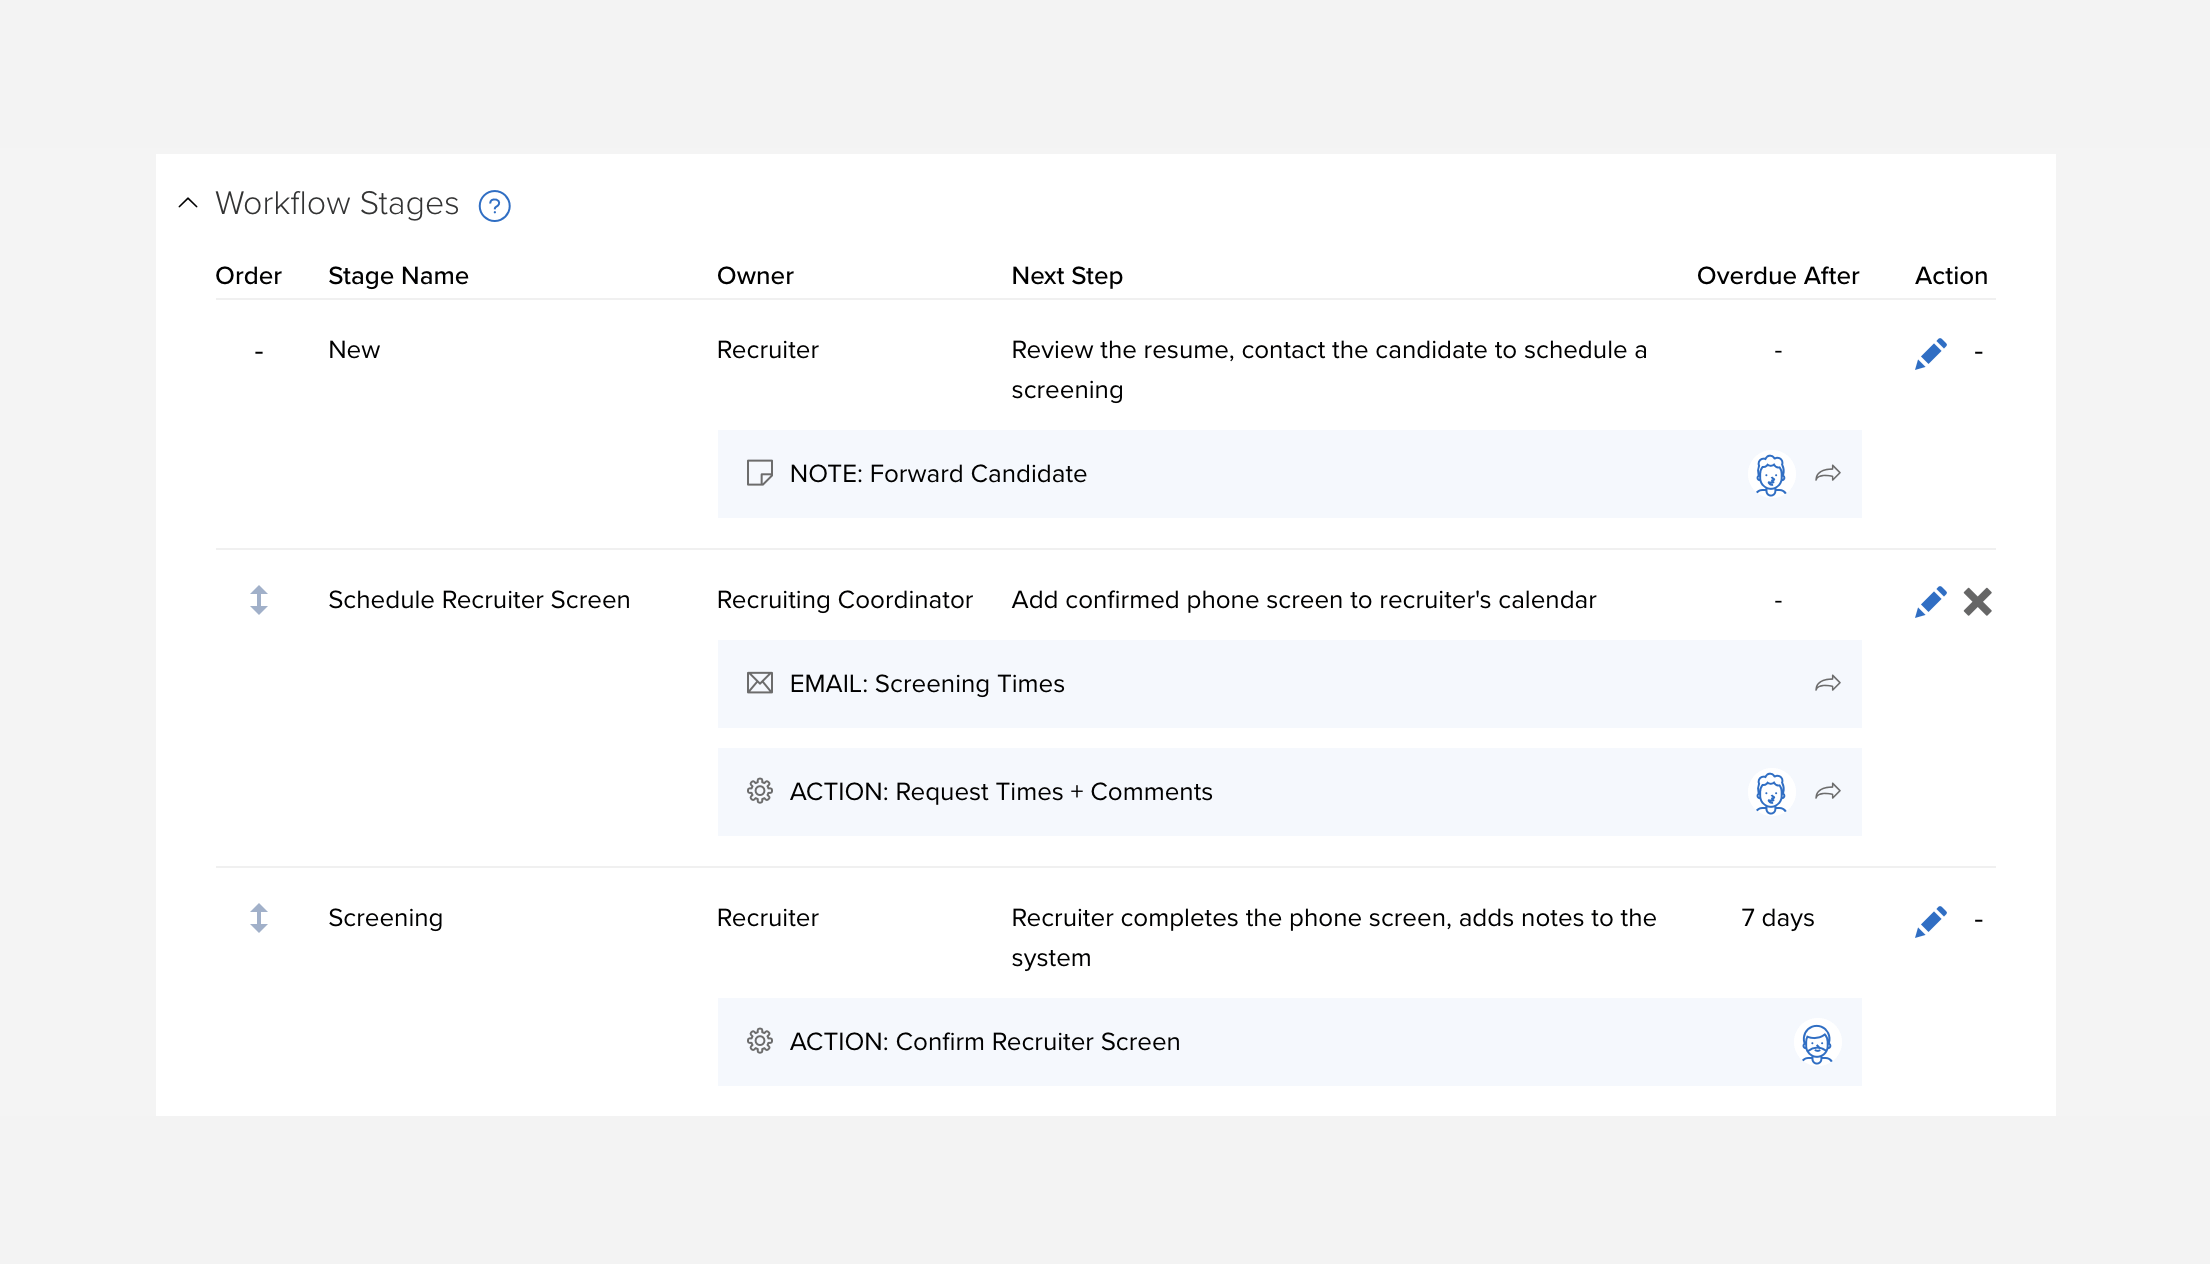 Workflow_Stages_to_fill_in